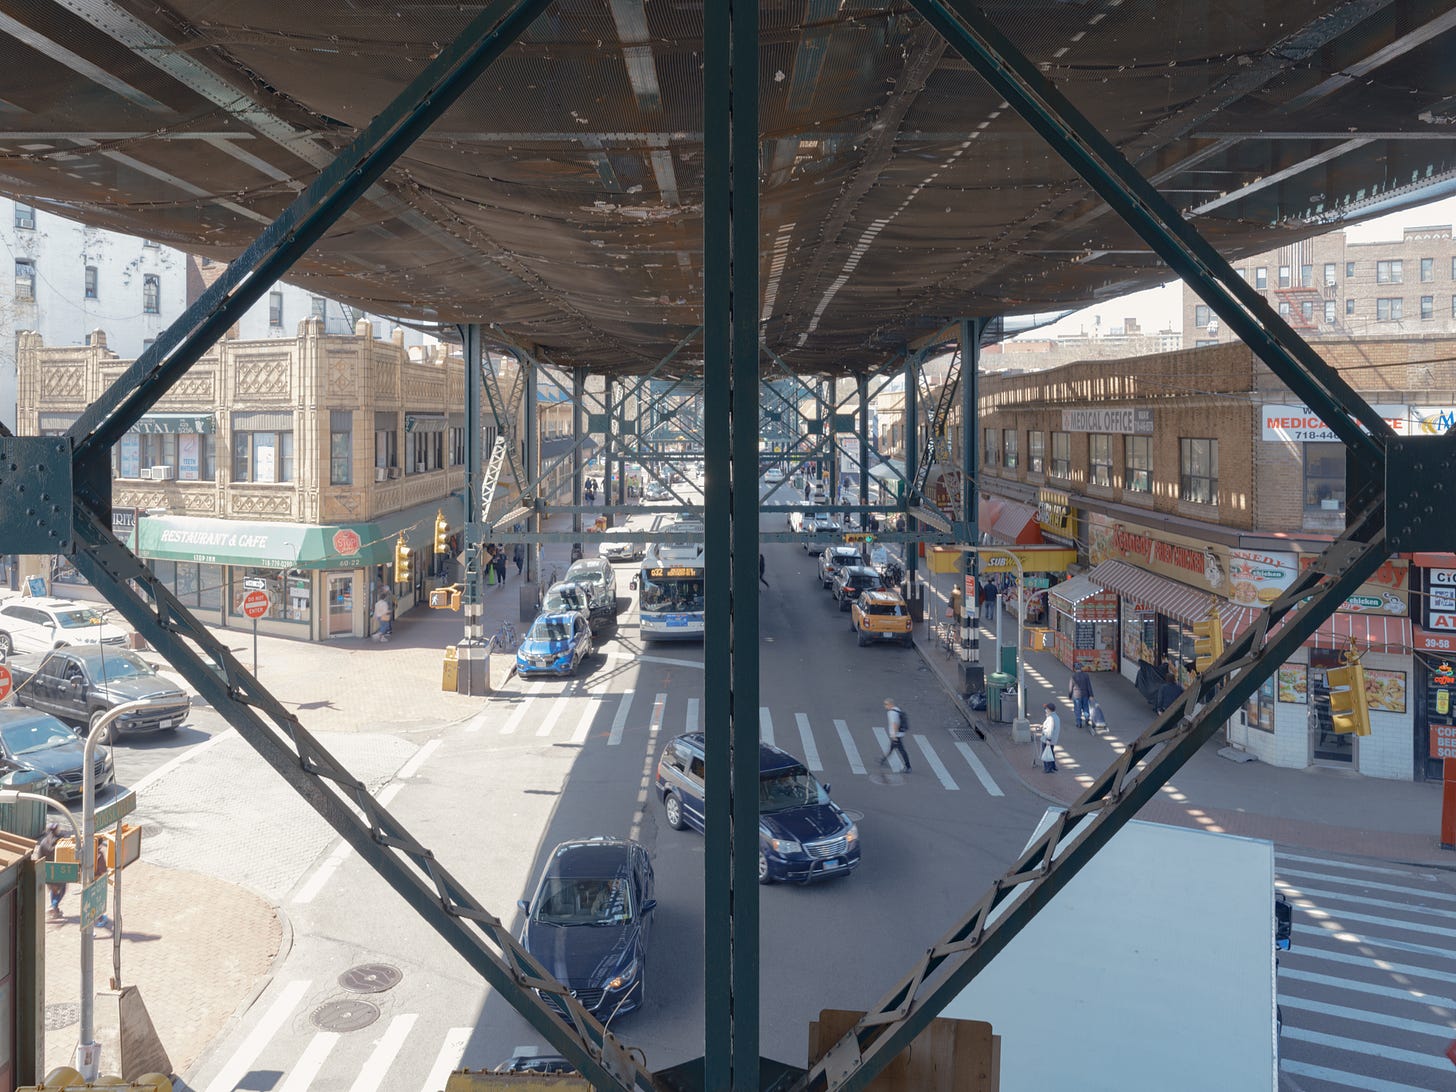 Elevated view under the train tracks, Woodside